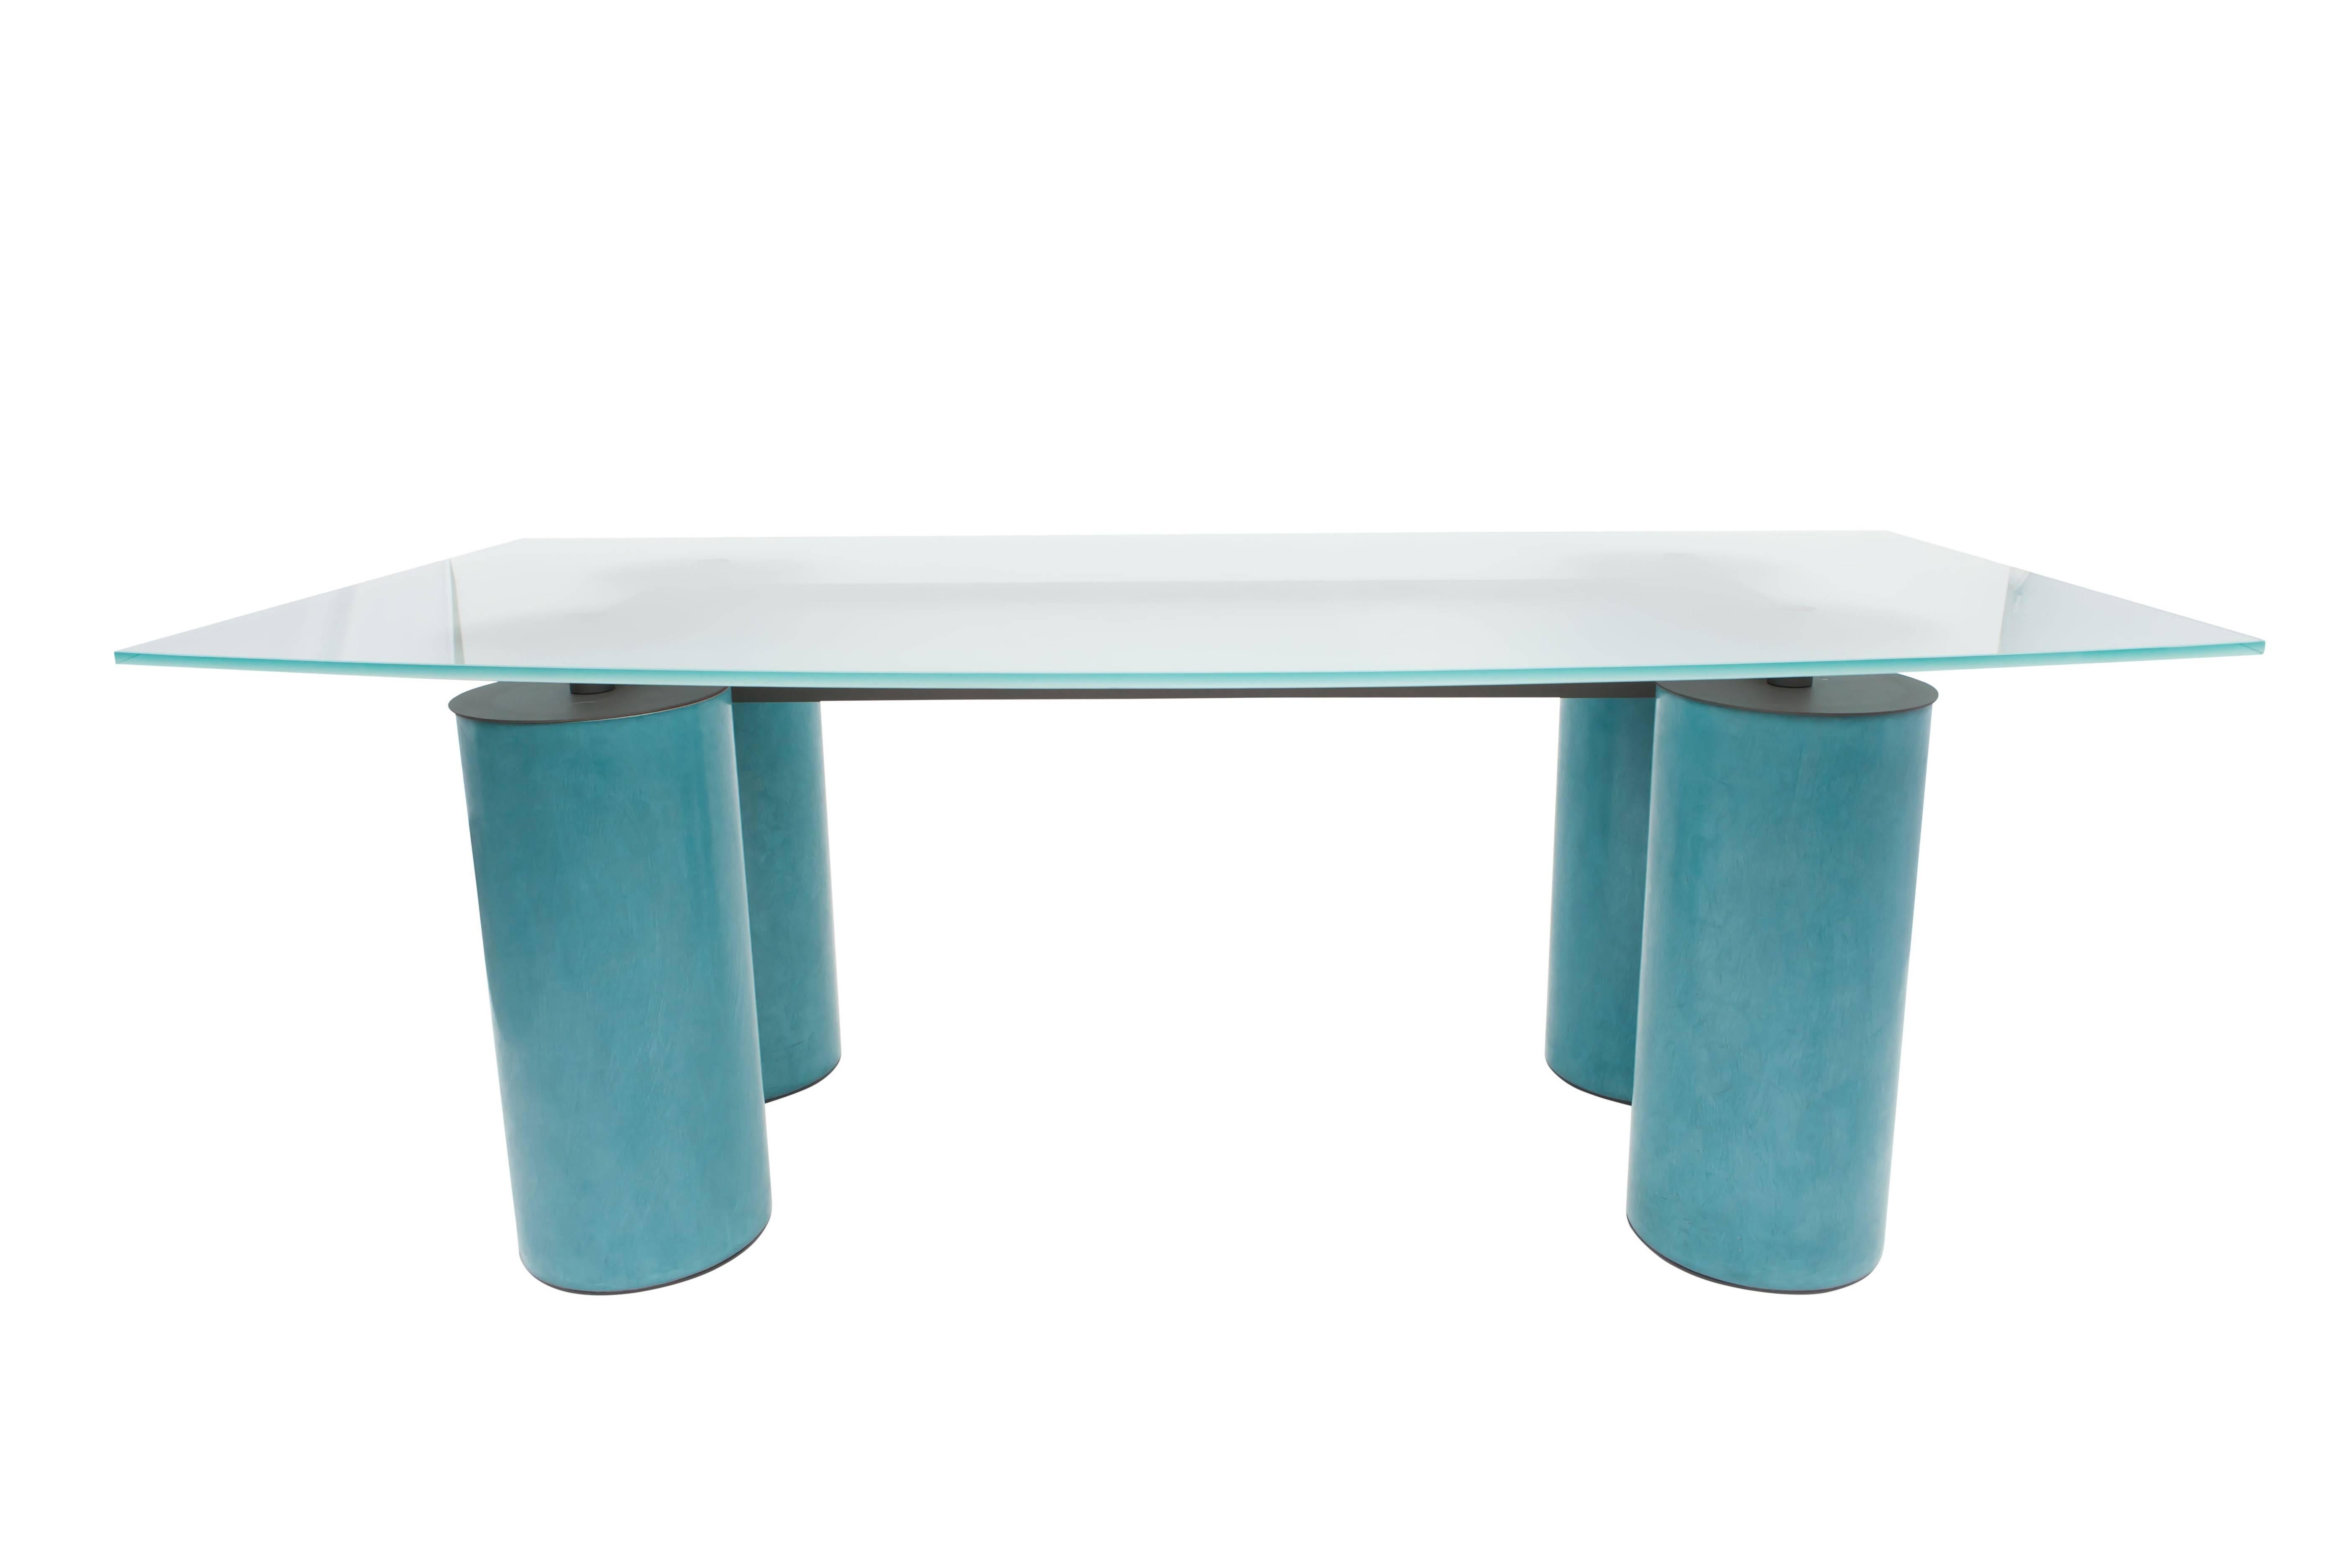 Mid-Century Modern Postmodern memphis style Serenissimo Table Desk by Vignelli for Acerbis